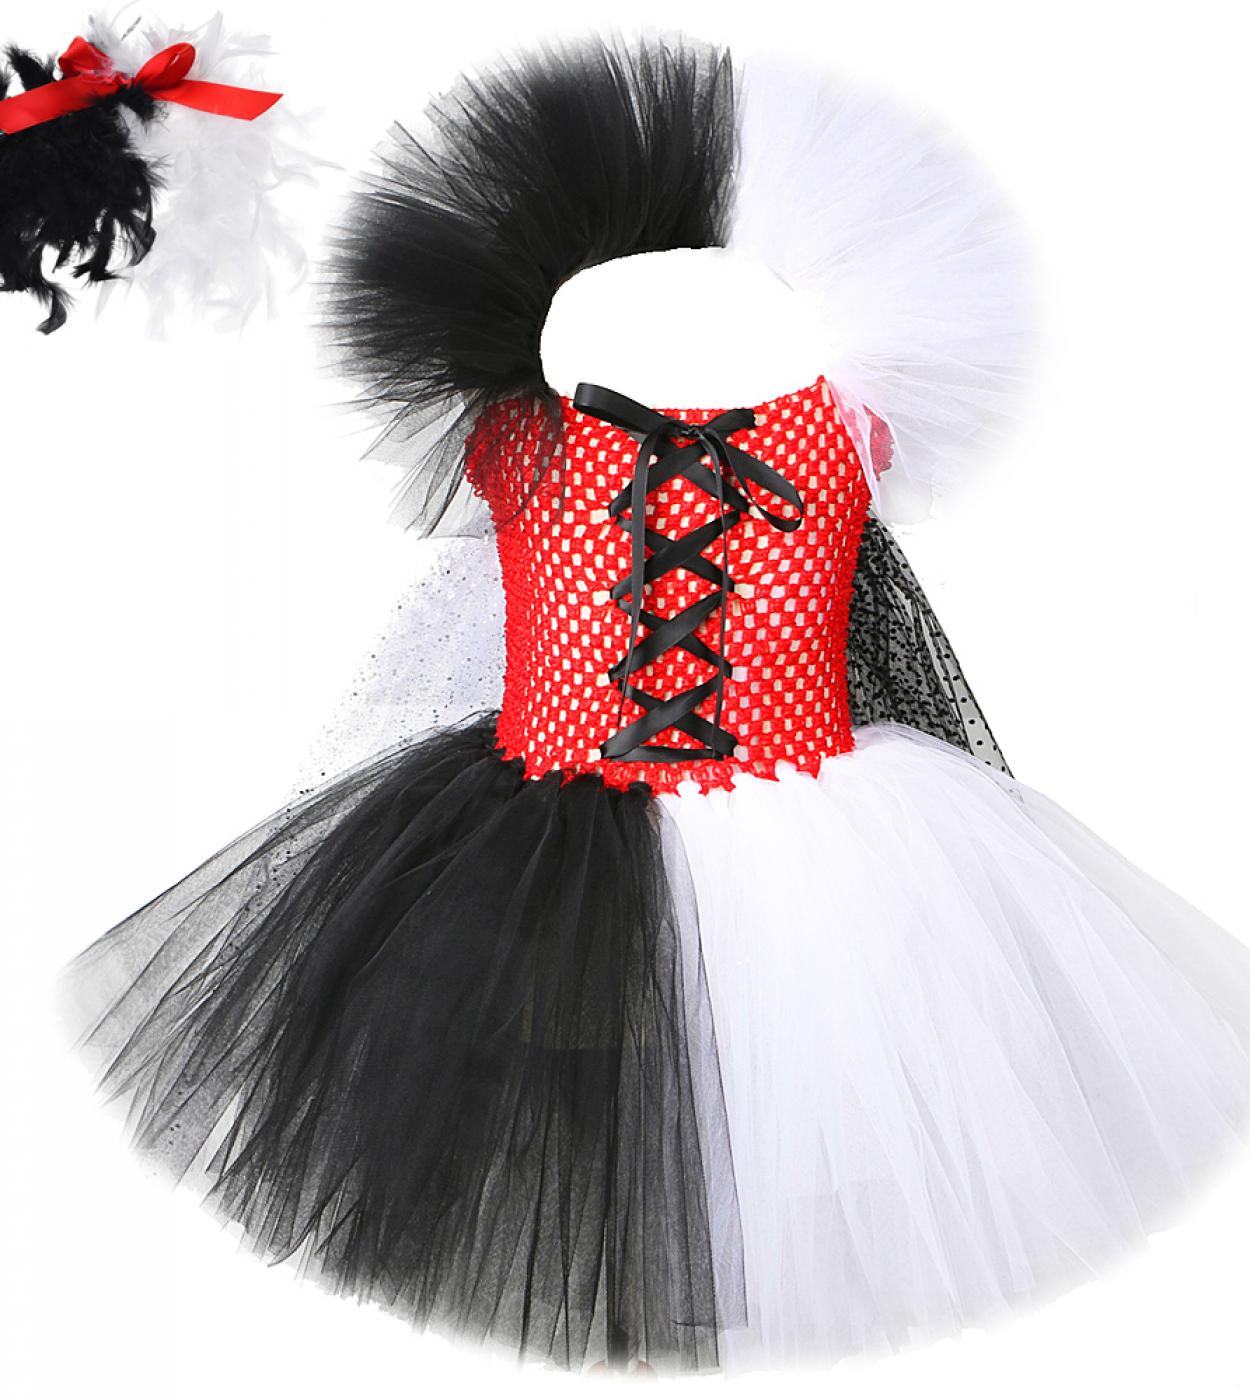 Evil Cruella Halloween Costumes For Girls Black White Witch Tutu Dress With Cloak Dalmatian Dog Outfit For Kids Cosplay 